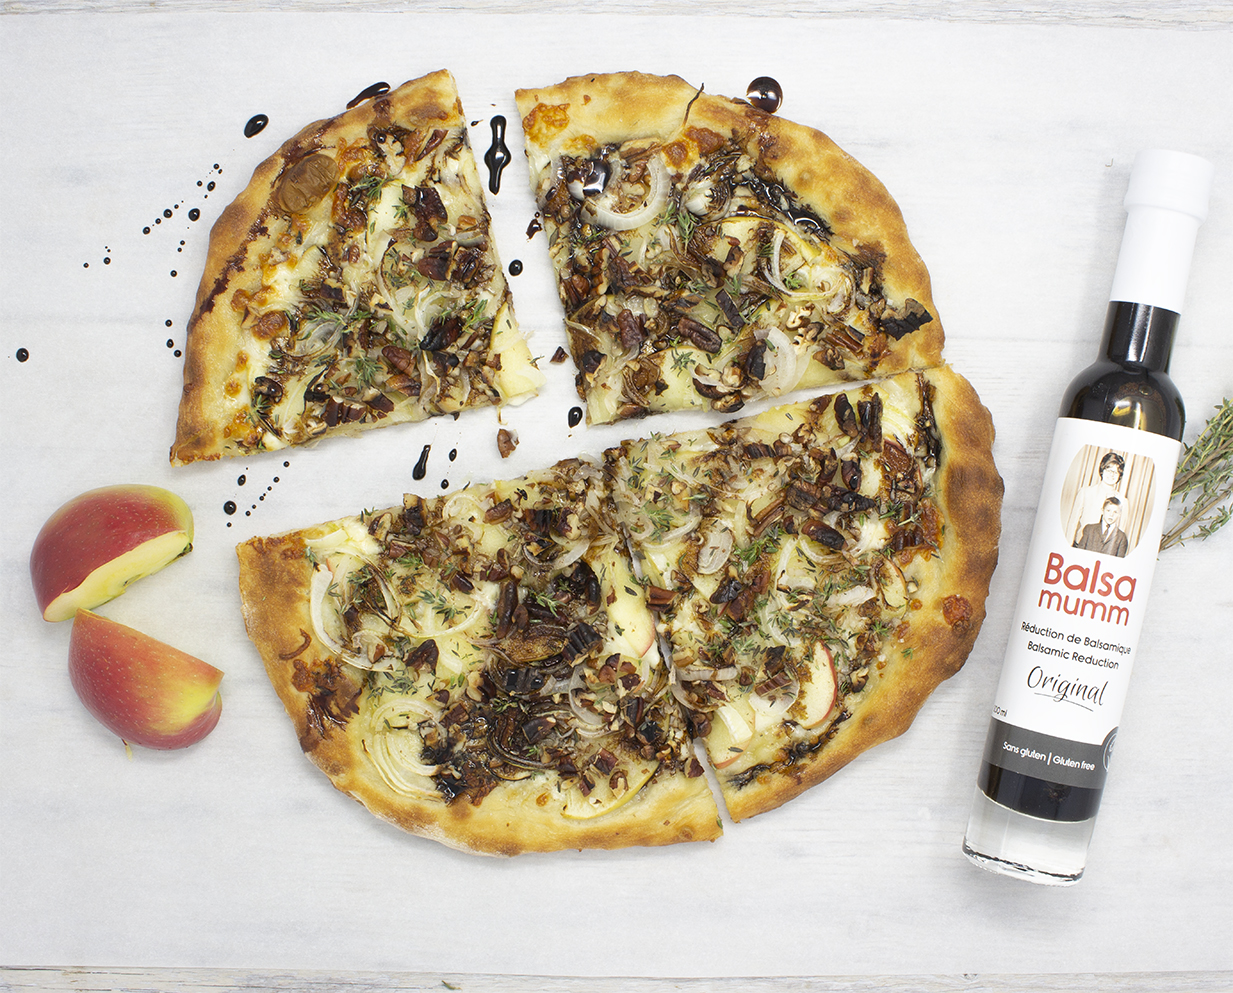 Apple and Onion Pizza with thyme and Balsamumm drizzle